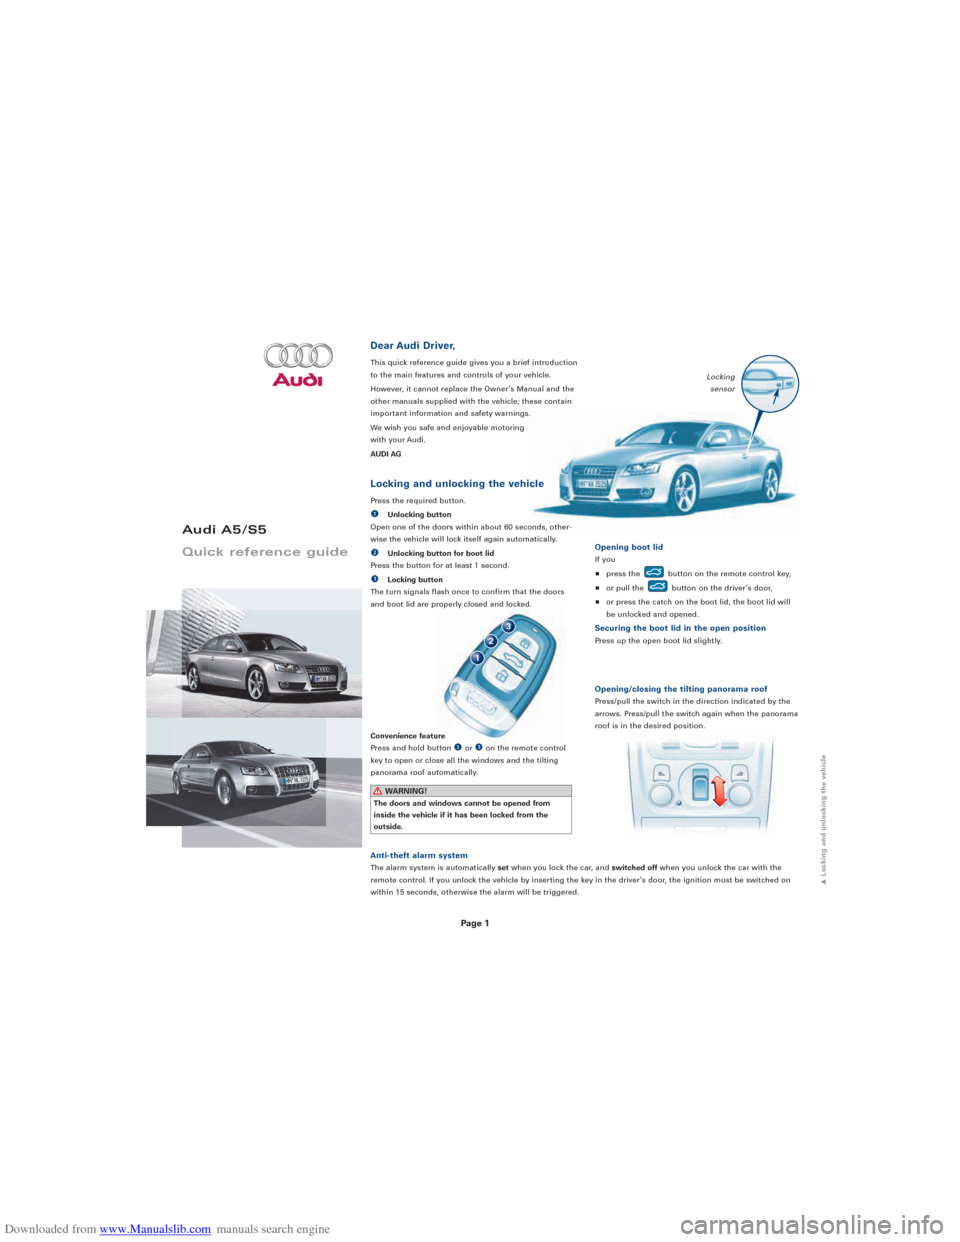 AUDI A5 2008 8T / 1.G Quick Reference Guide Downloaded from www.Manualslib.com manuals search engine 
Page 1

Audi A5/S5
Quick  reference  guide

Dear Audi Driver,
This quick reference guide gives you a brief introduction 
to the main features 